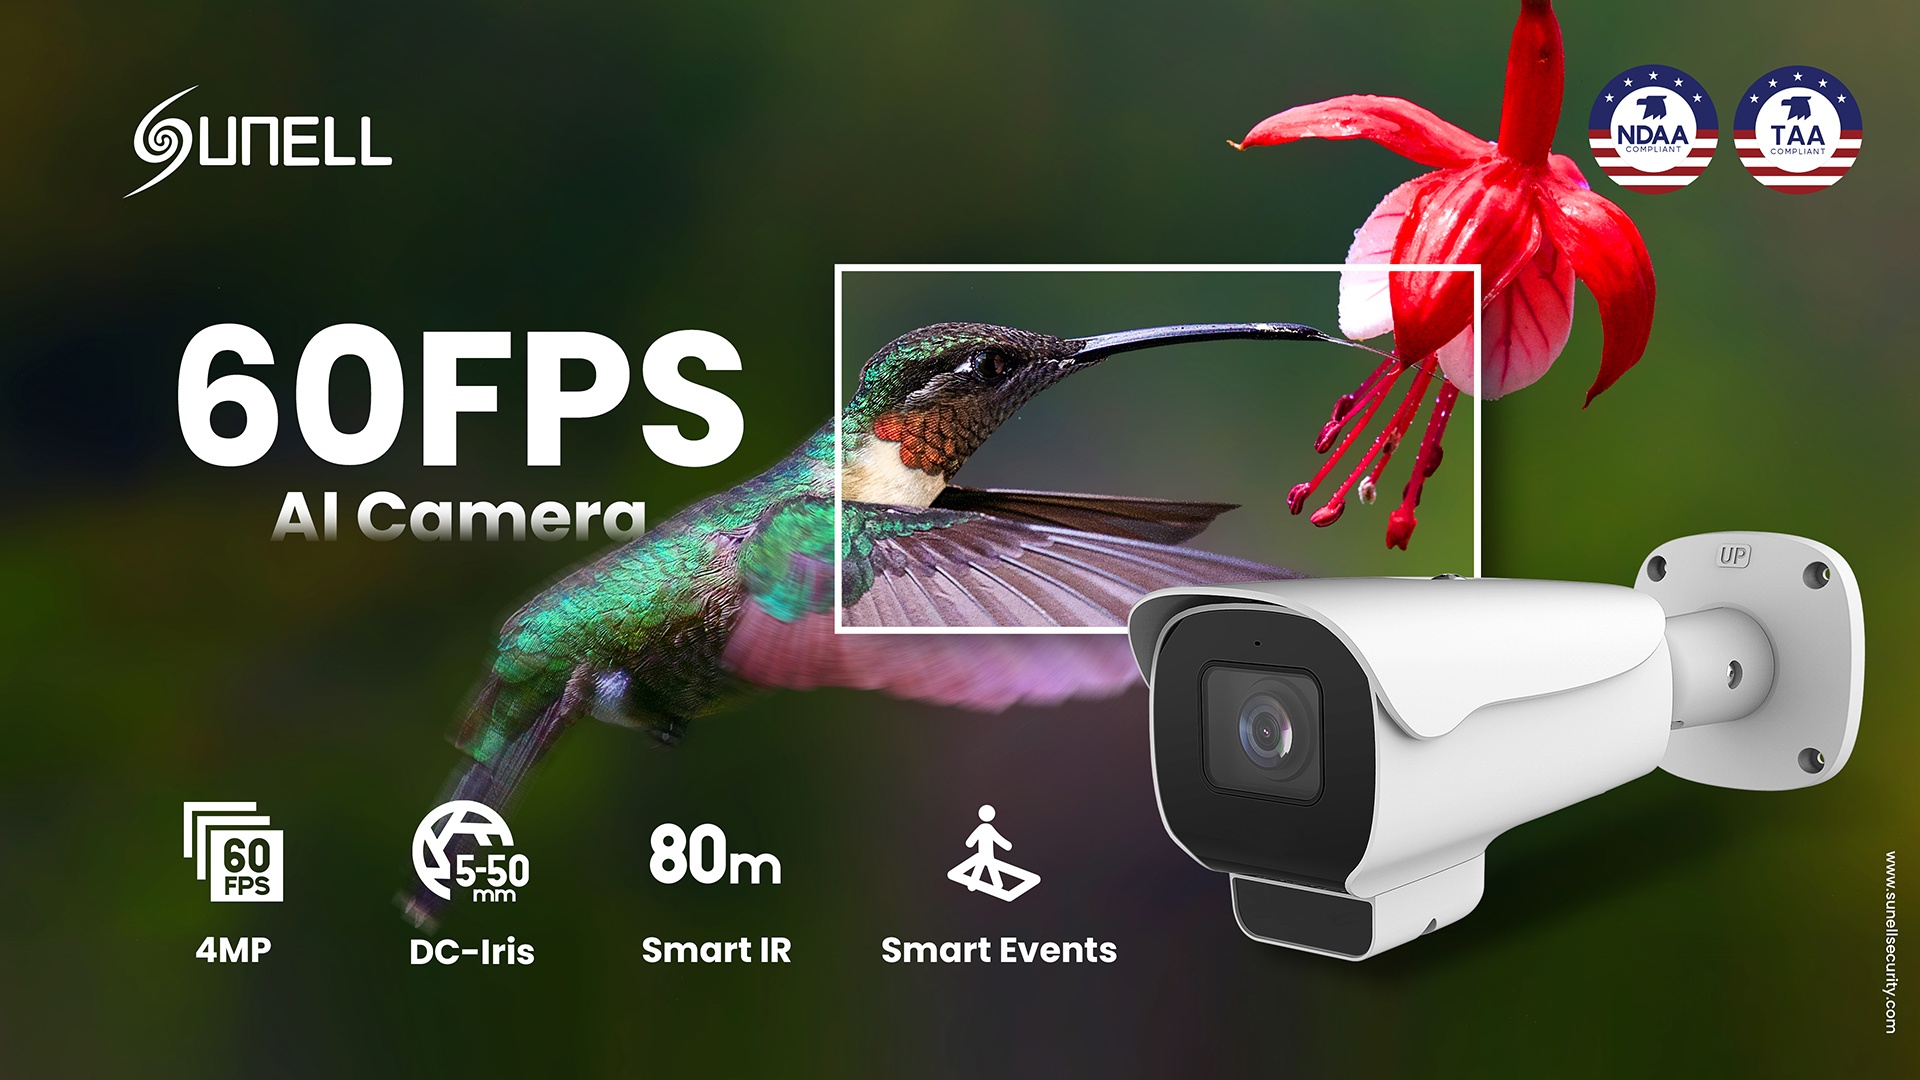 Exploring_the_Advantages_of_60fps_in_Security_Video_Surveillance_-_Sunell_60fps_AI_Camera.jpg